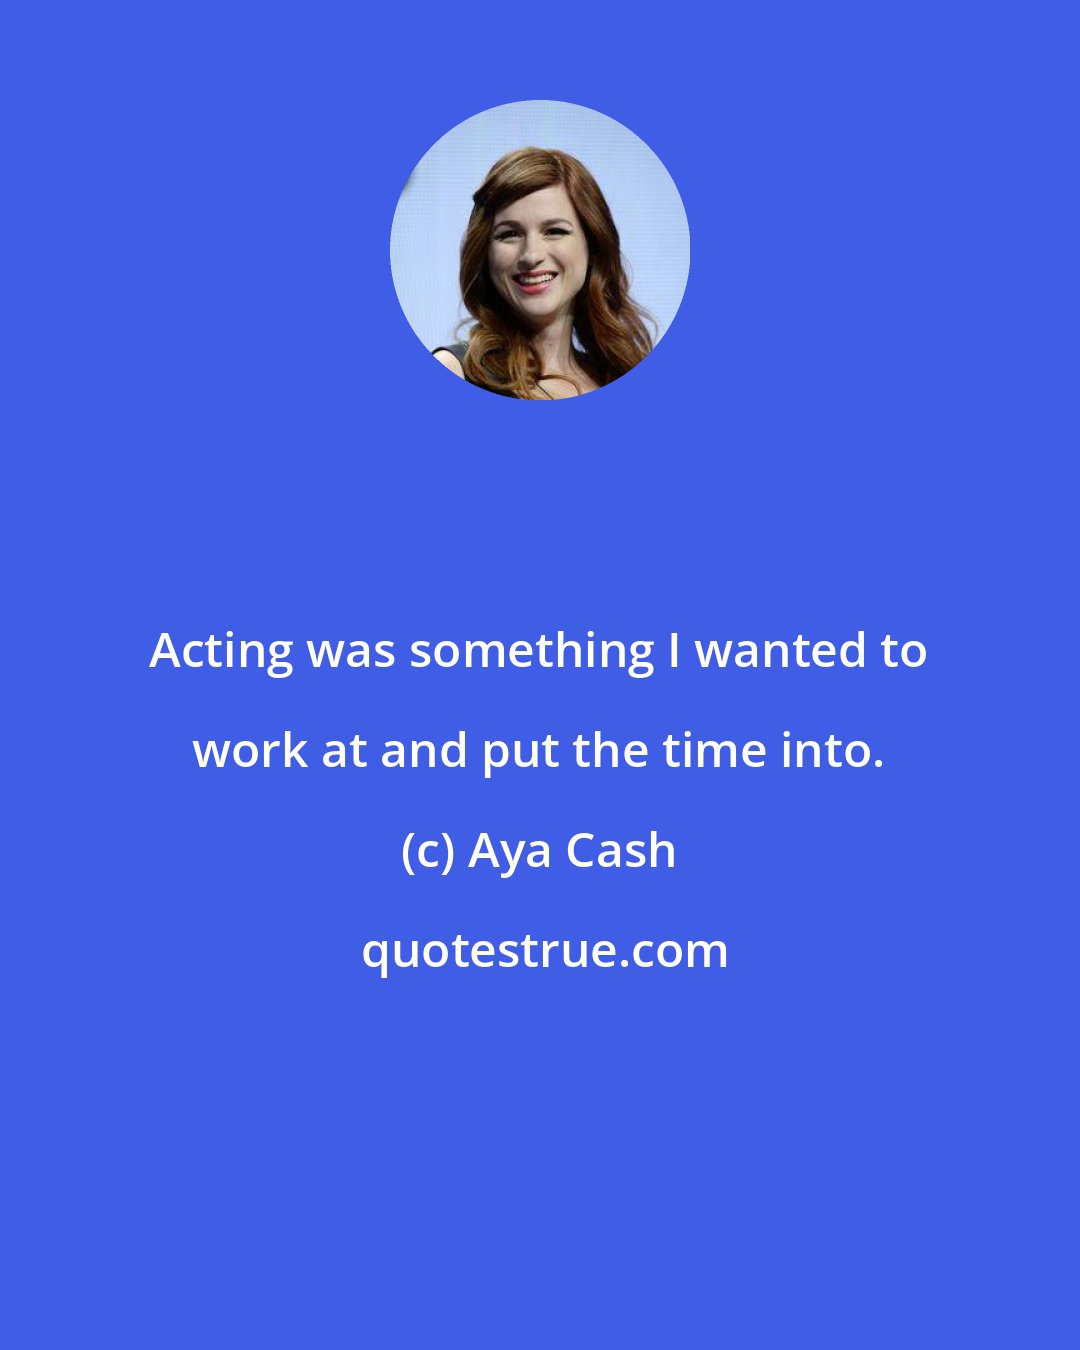 Aya Cash: Acting was something I wanted to work at and put the time into.